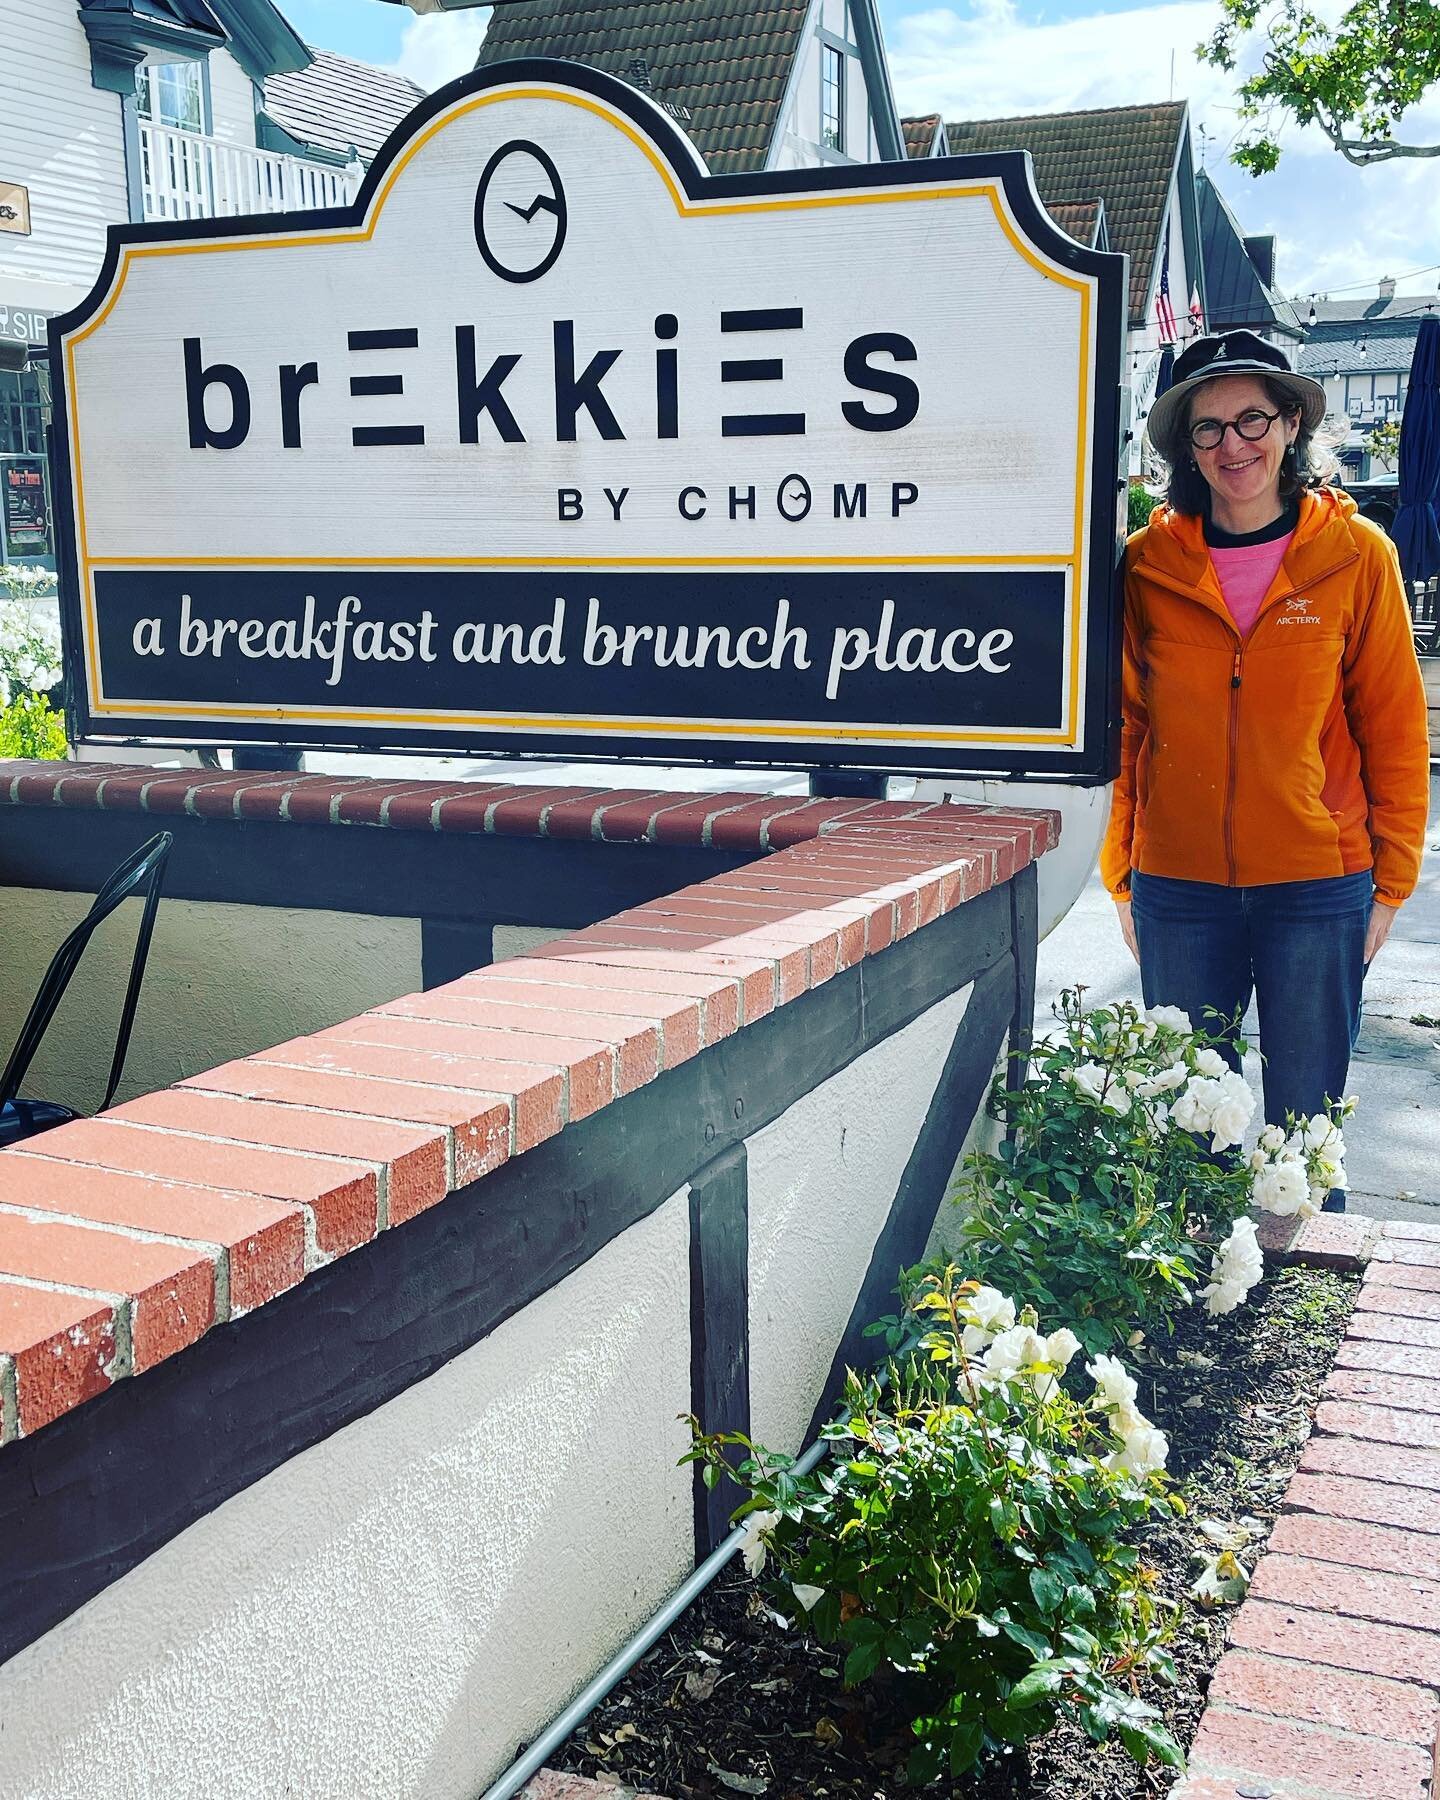 I took Brian up to Santa Ynez and we did all the things!
1. Brekkies by Chomp 
2. Almond butter French toast with bananas and bacon
3. That sign in Los Alamos everybody takes a picture of
4. Hans Christian Andersen museum: tiny but surprisingly engro